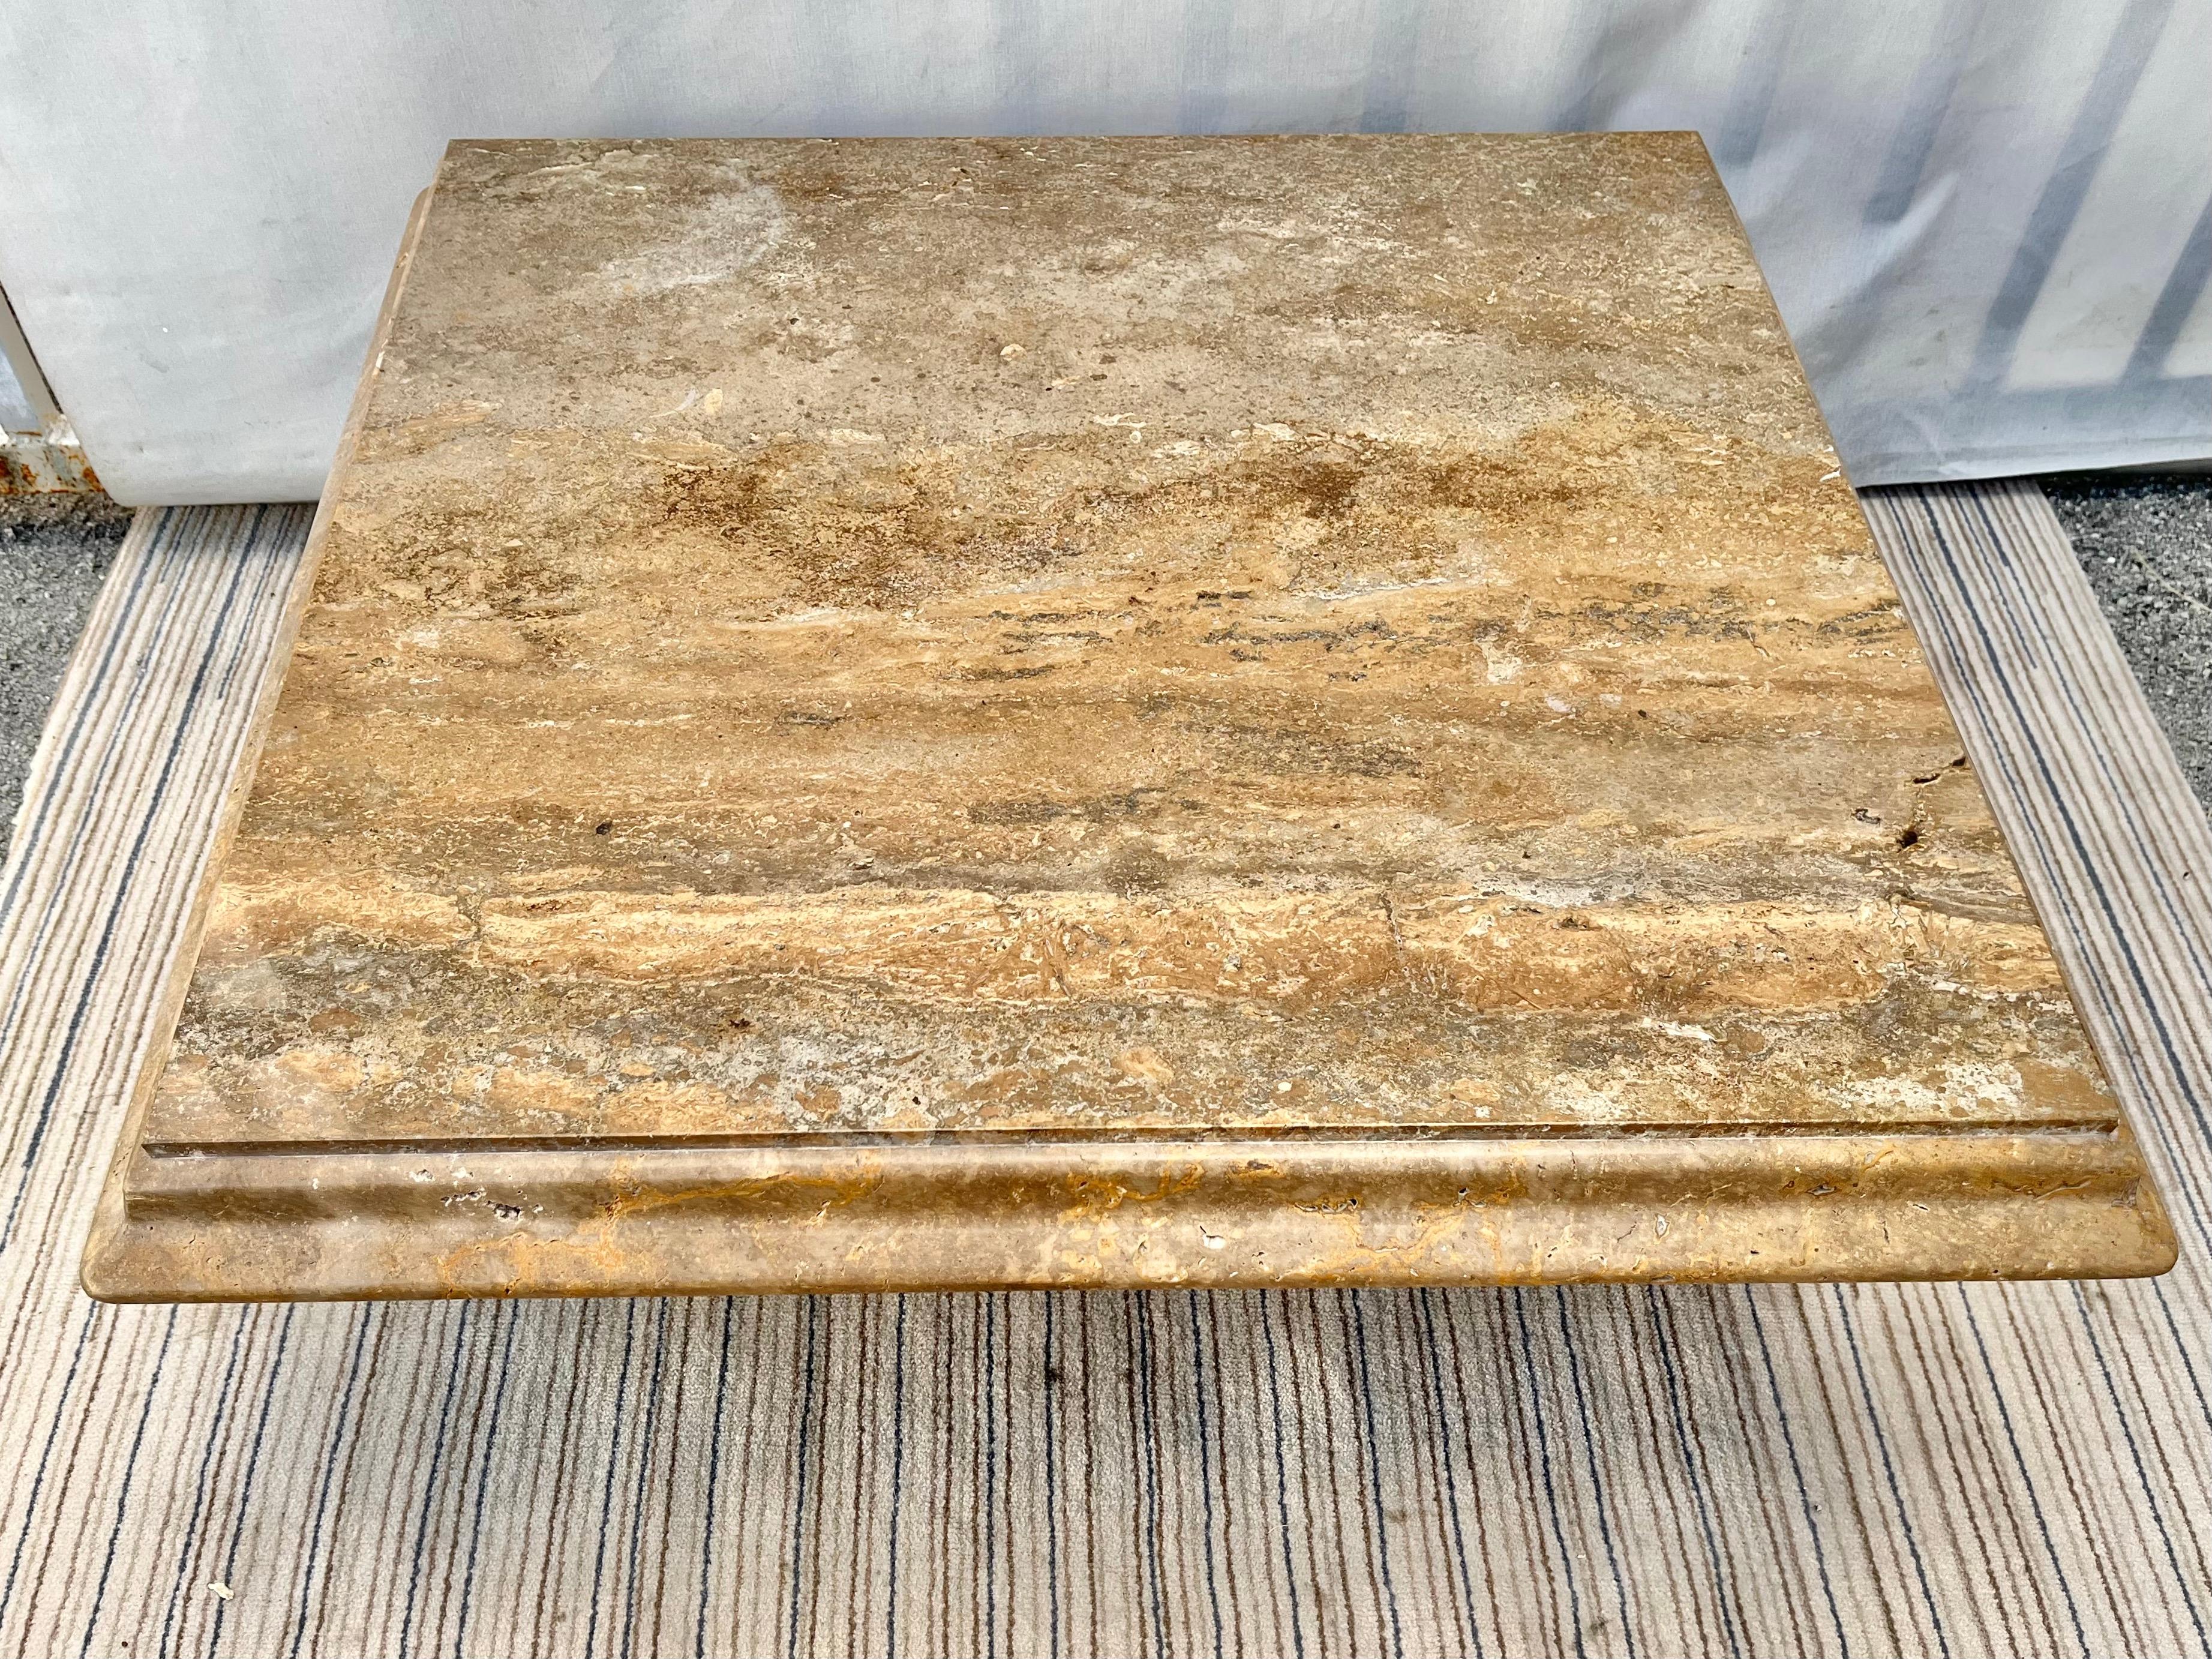 1980s Postmodern Italian Travertine Coffee Table by Stone Intentional, Italy For Sale 1